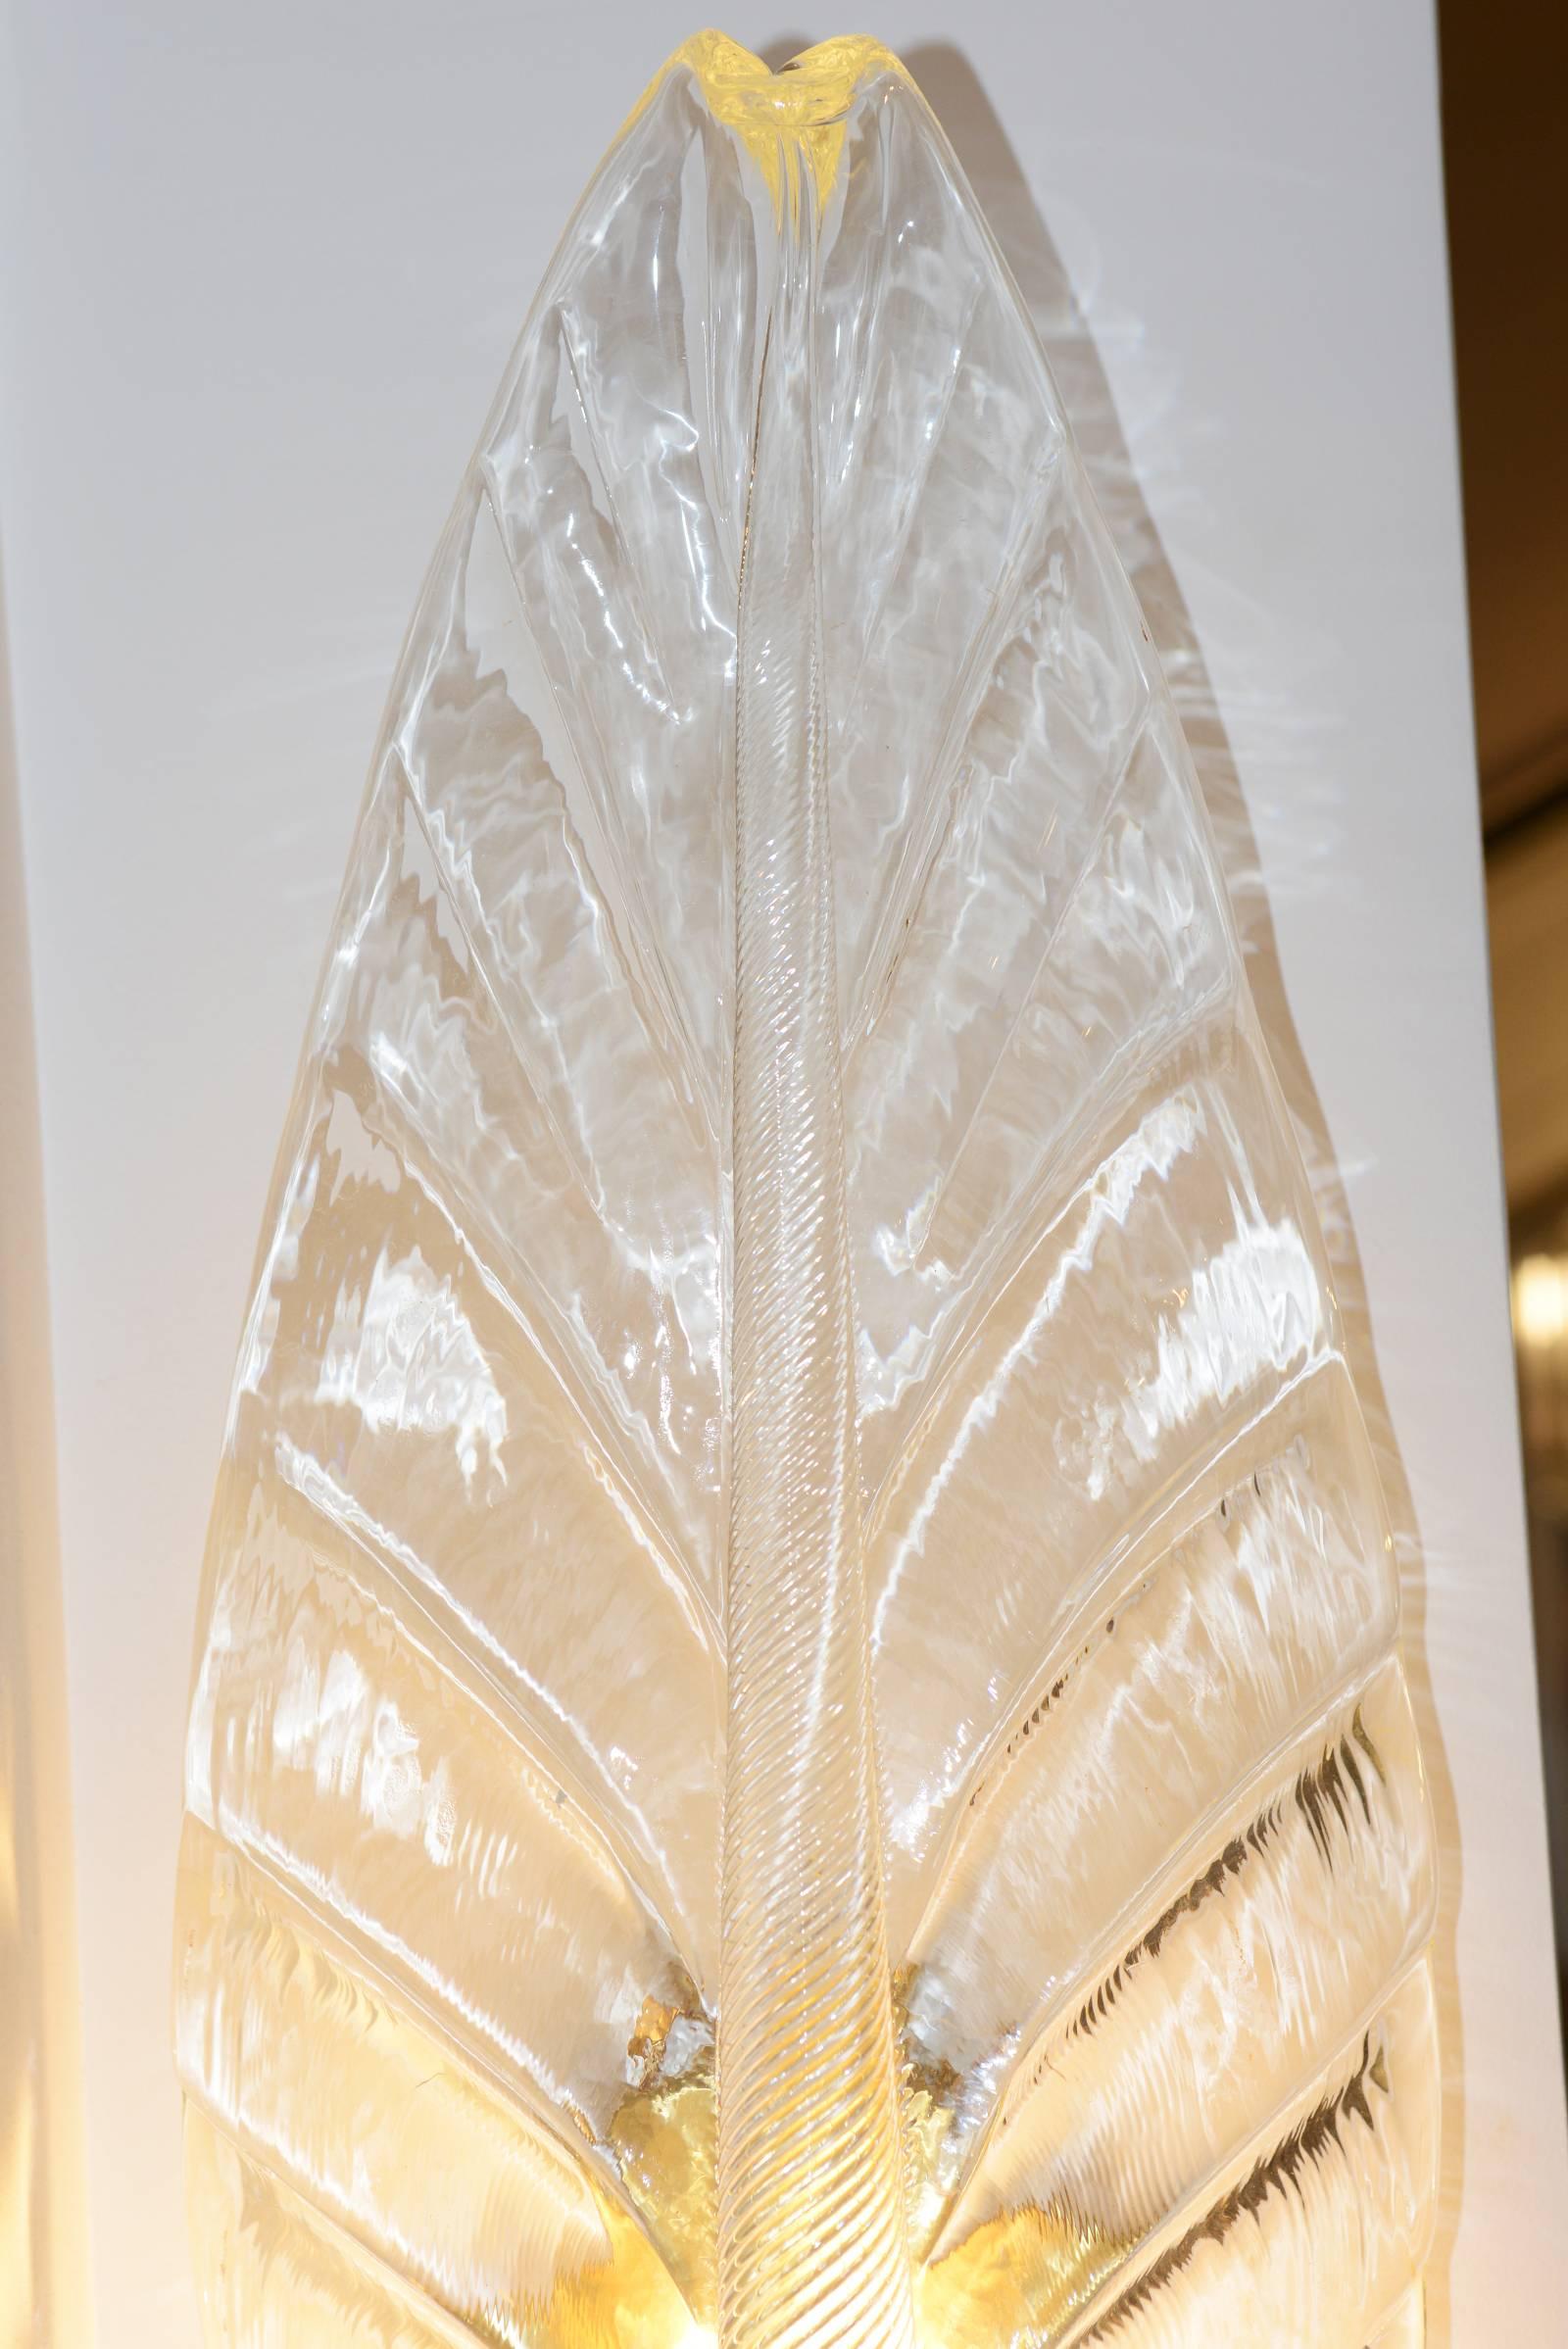 Wall light leaves set of two in pure handcrafted
Murano crystal glass. Art Deco style. Exceptional piece.
Measures: L 24 x D 17.5 x H 67.5cm/piece.
Unit price: 2900,00€
Set of two price: 5800,00€.
 